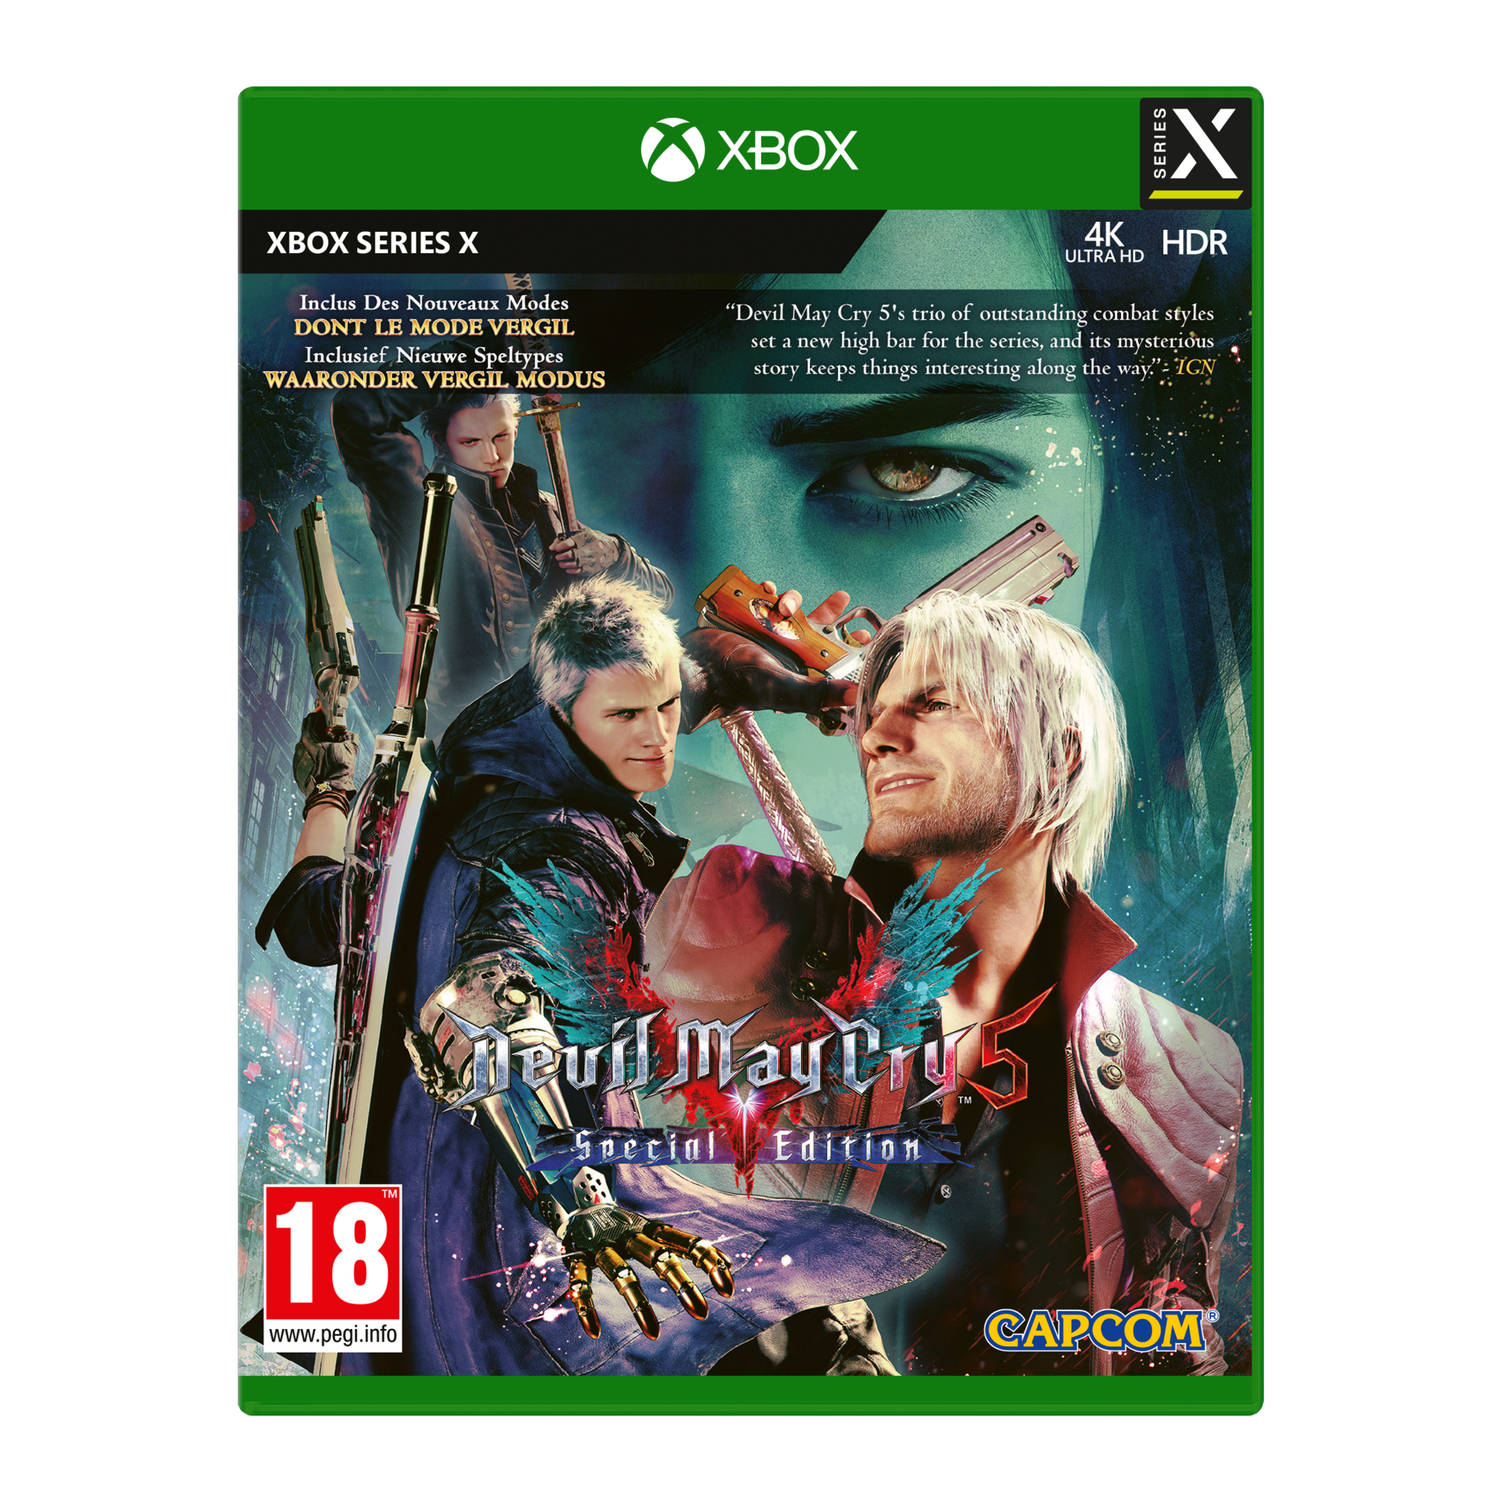 Devil may cry 5 (Special Edition), (X-Box Series X). XBOXSERIESX